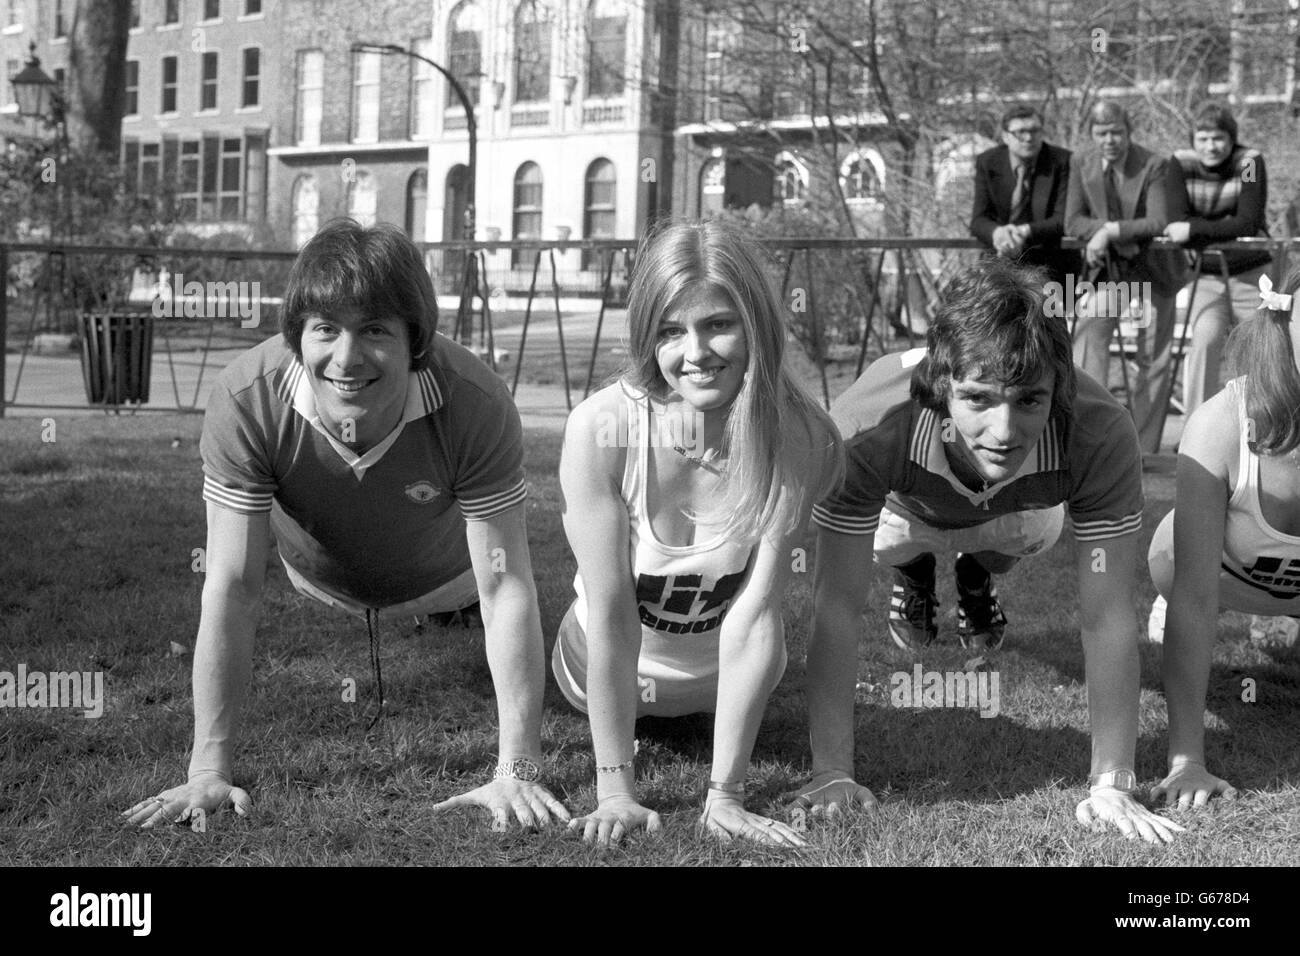 Manchester United stars Stuart Pearson (left) and Lou Macari, introduce Cathryn Robertson, 25, to the rigours of football training in London. The players were helping a group of beauty queens prepare for a pancake race. Stock Photo